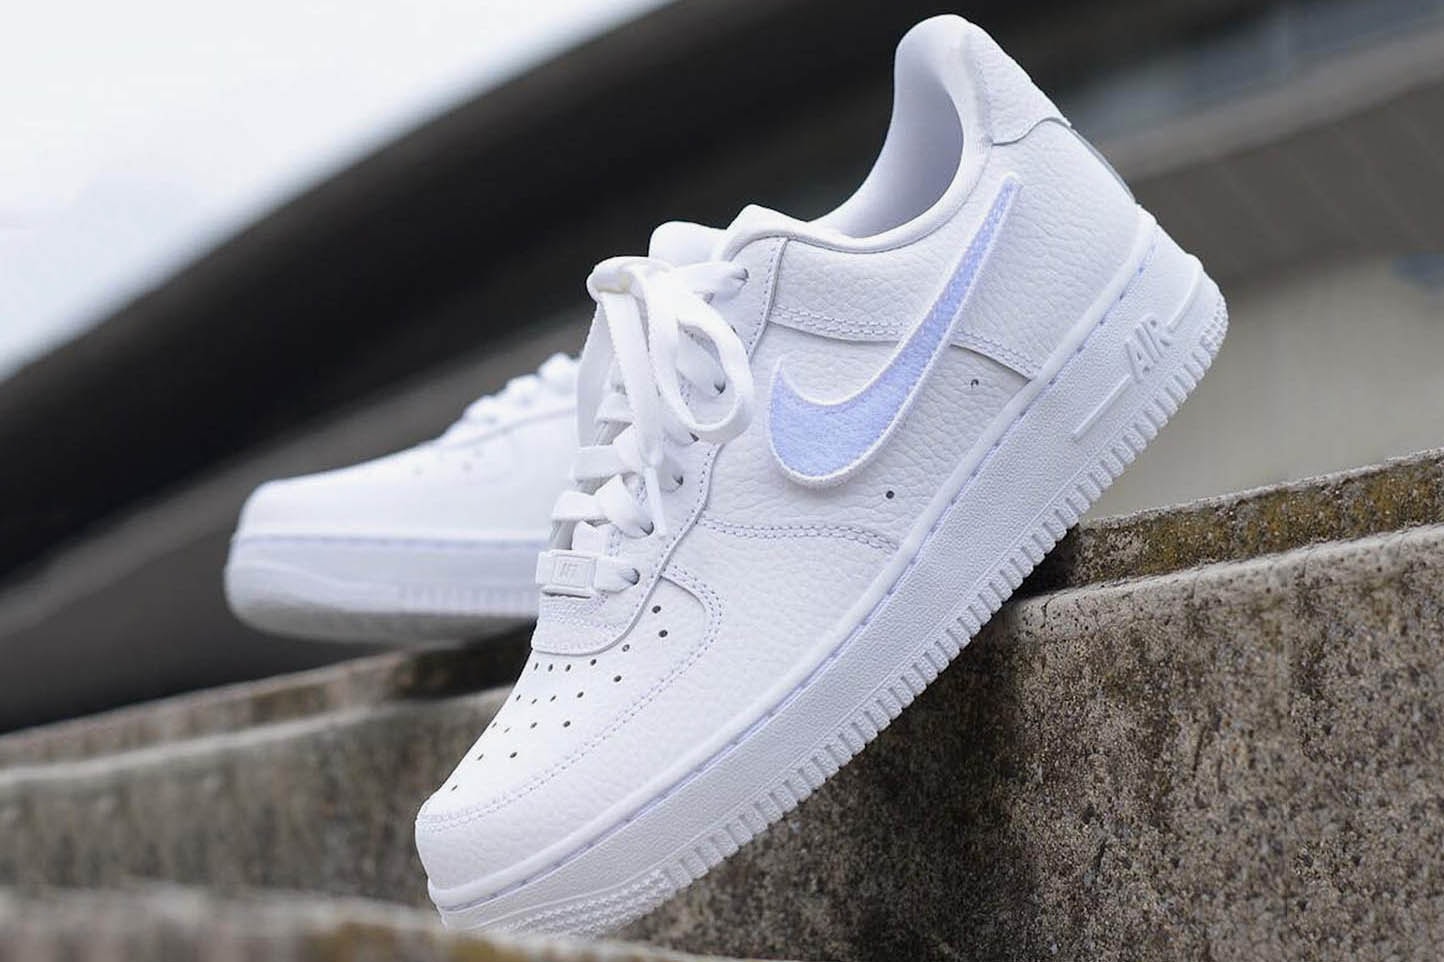 Nike to Drop Customizable Air Force 1/1 Sneakers